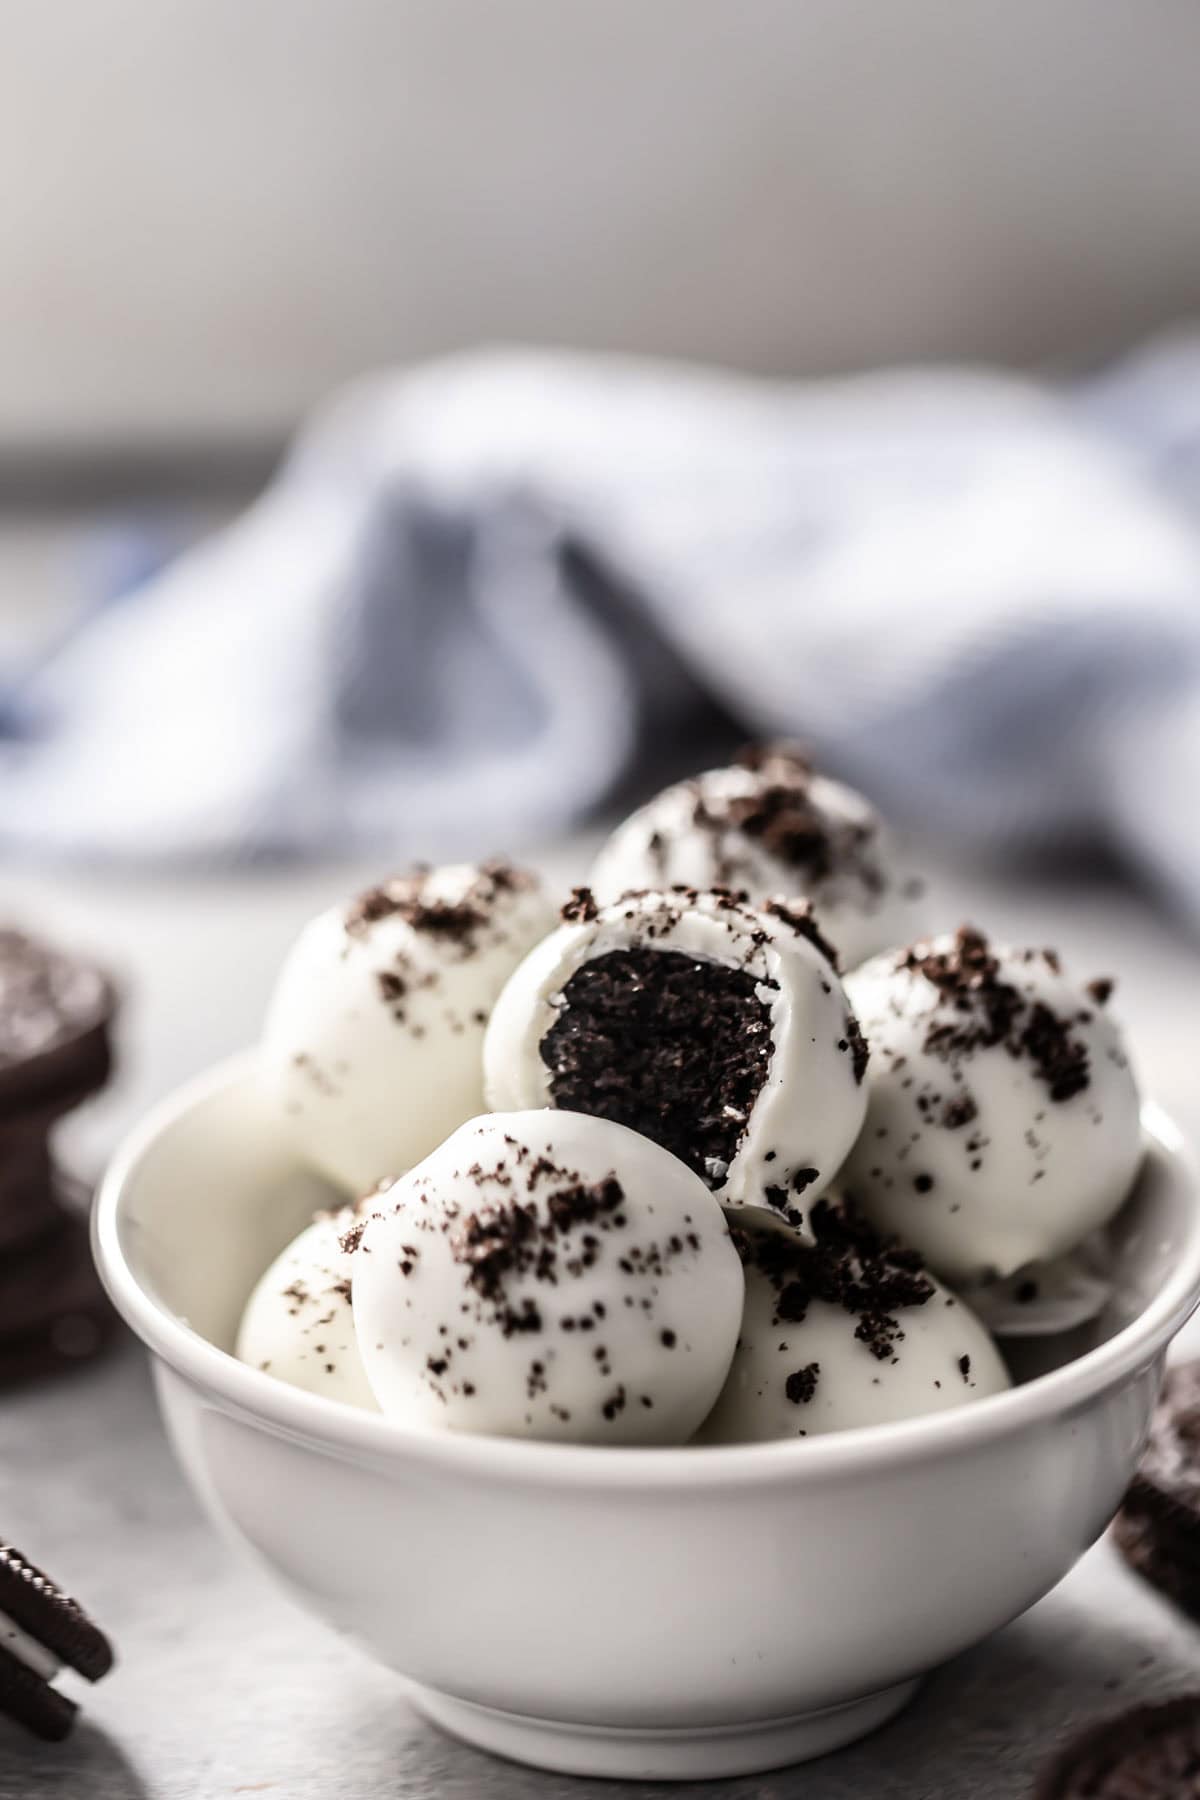 oreo truffle balls in a bowl coated in white chocolate with a bite taken from it and sprinkled with oreo crumbs.